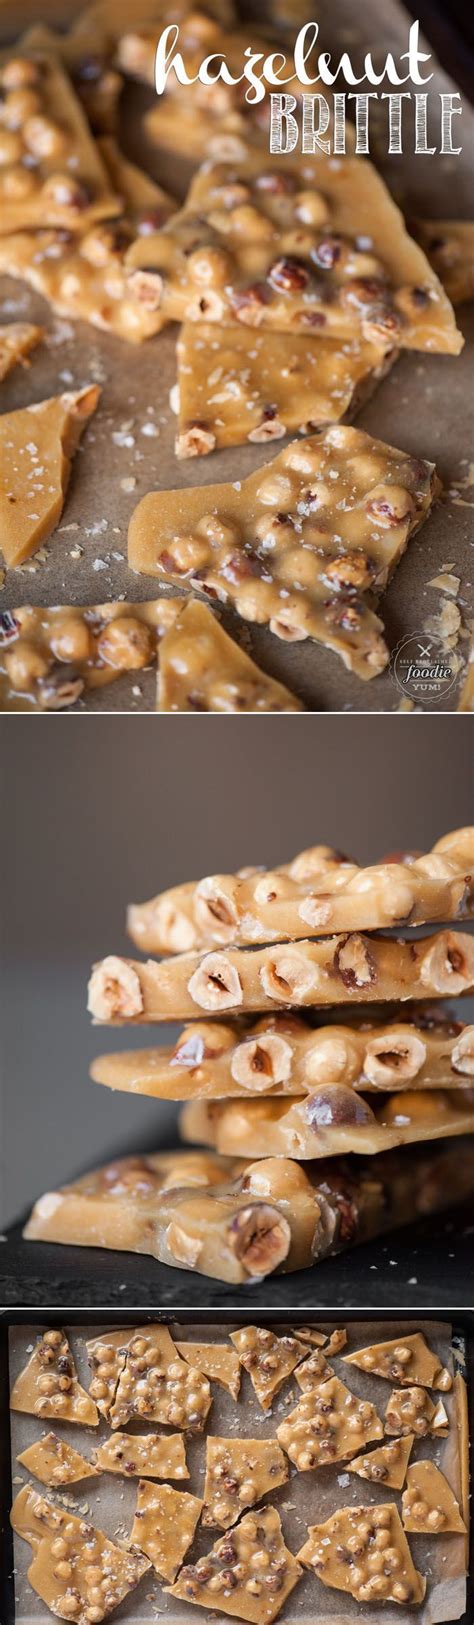 Homemade Hazelnut Brittle Is A Quick And Easy Treat That Is Sure To